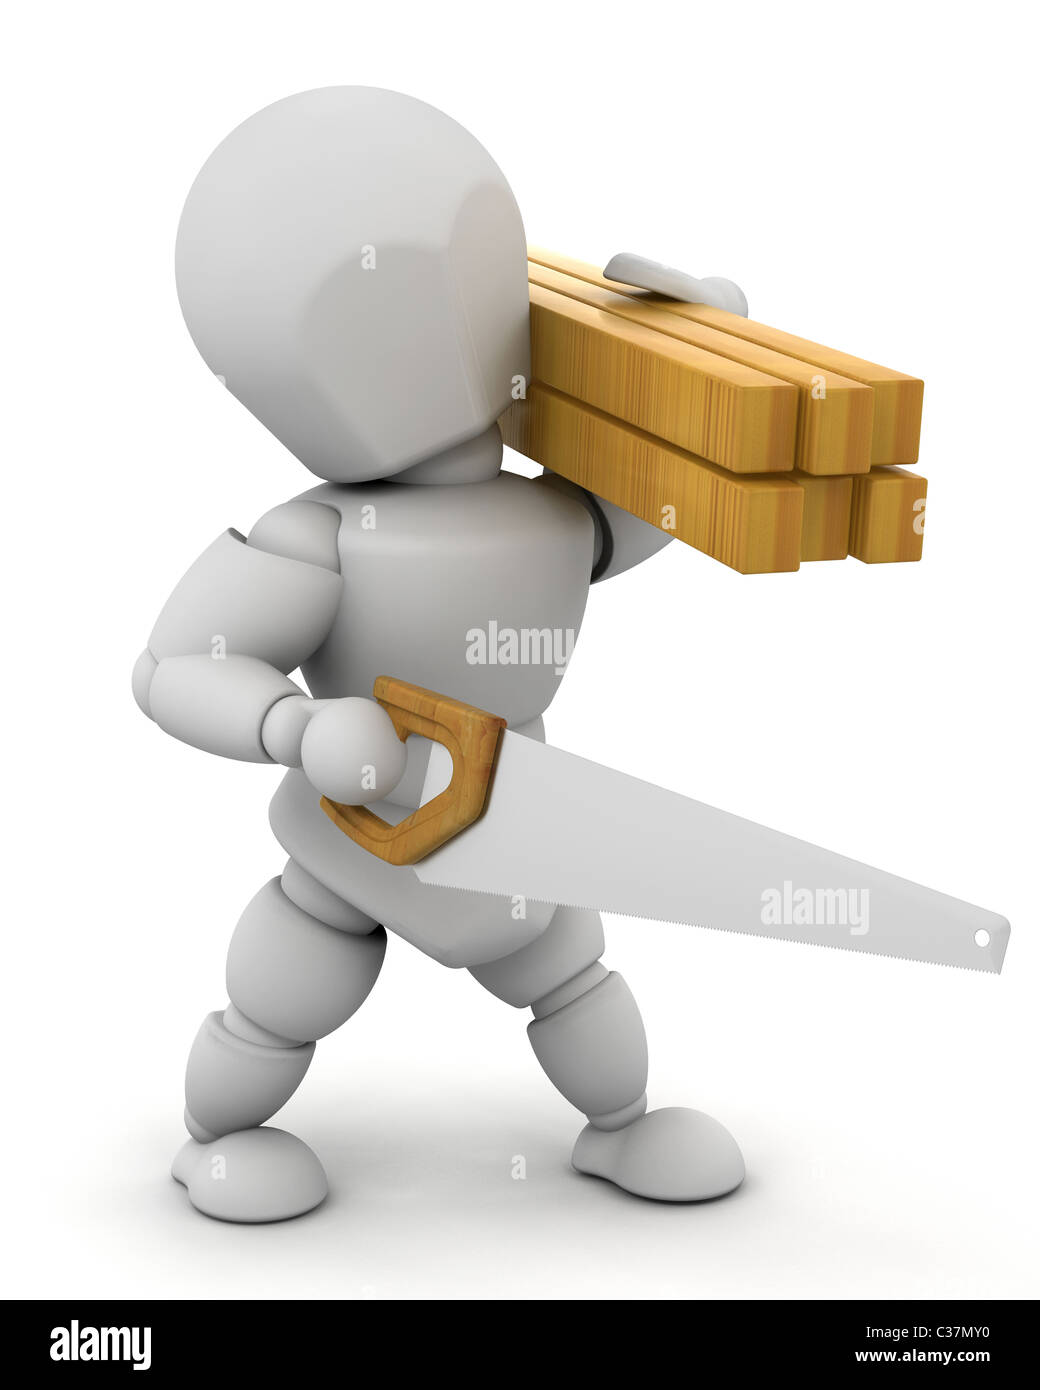 3D Render of a man sawing wood Stock Photo